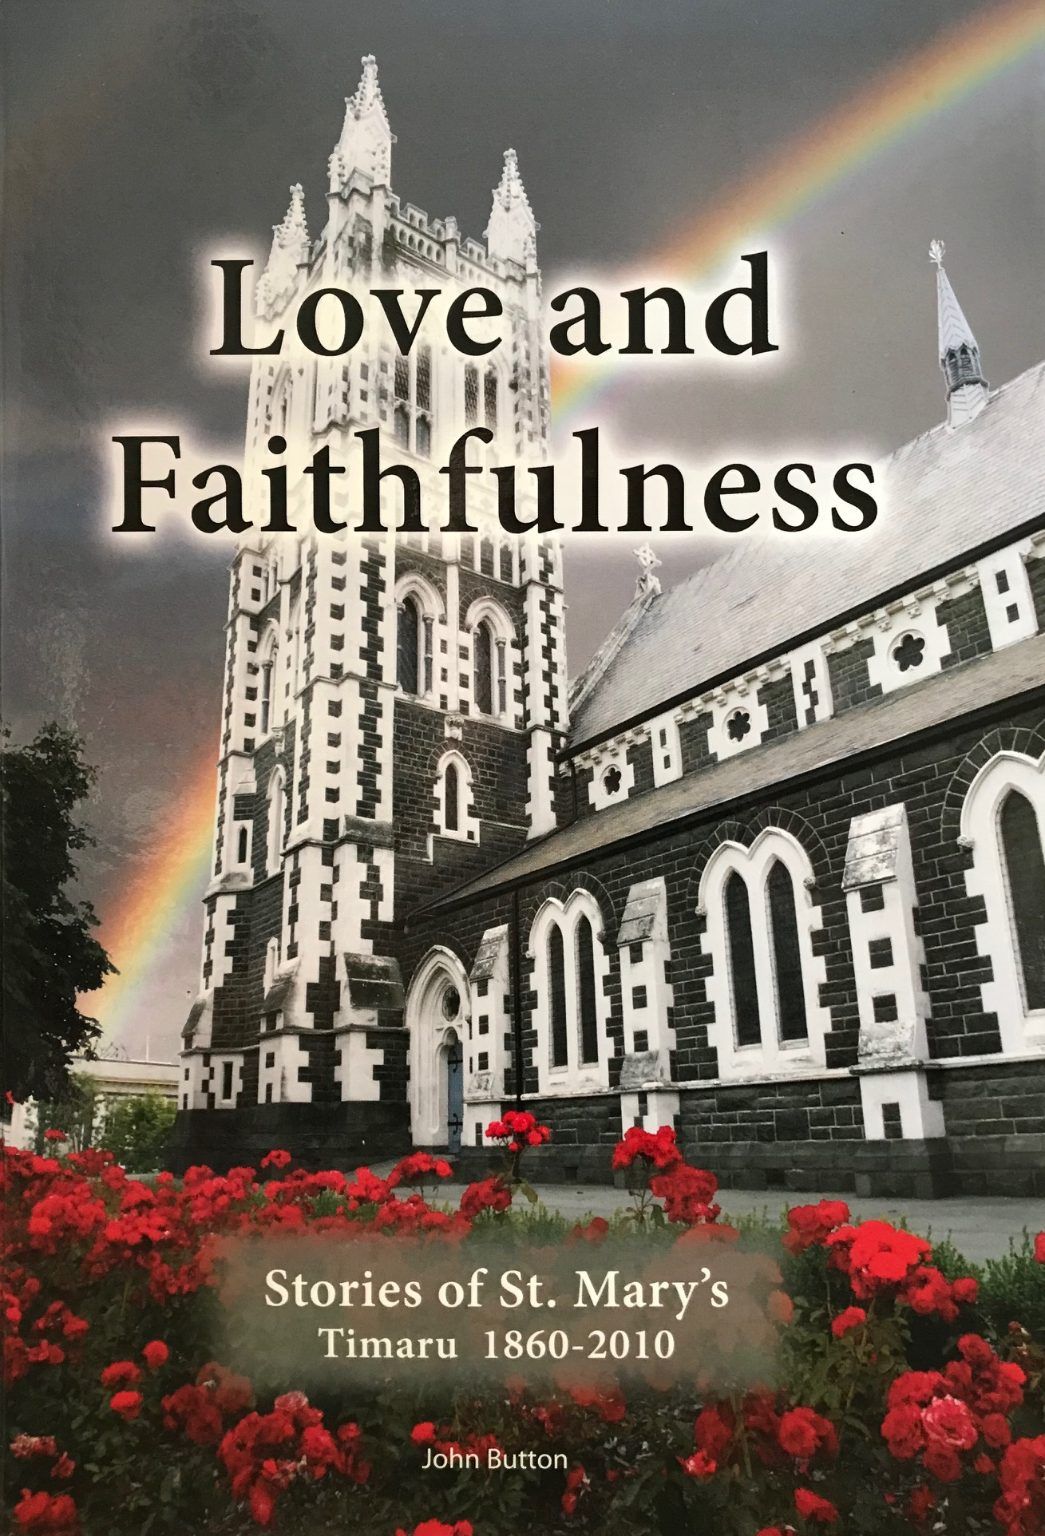 LOVE AND FAITHFULNESS: Stories of St. Marys Timaru 1860-2010